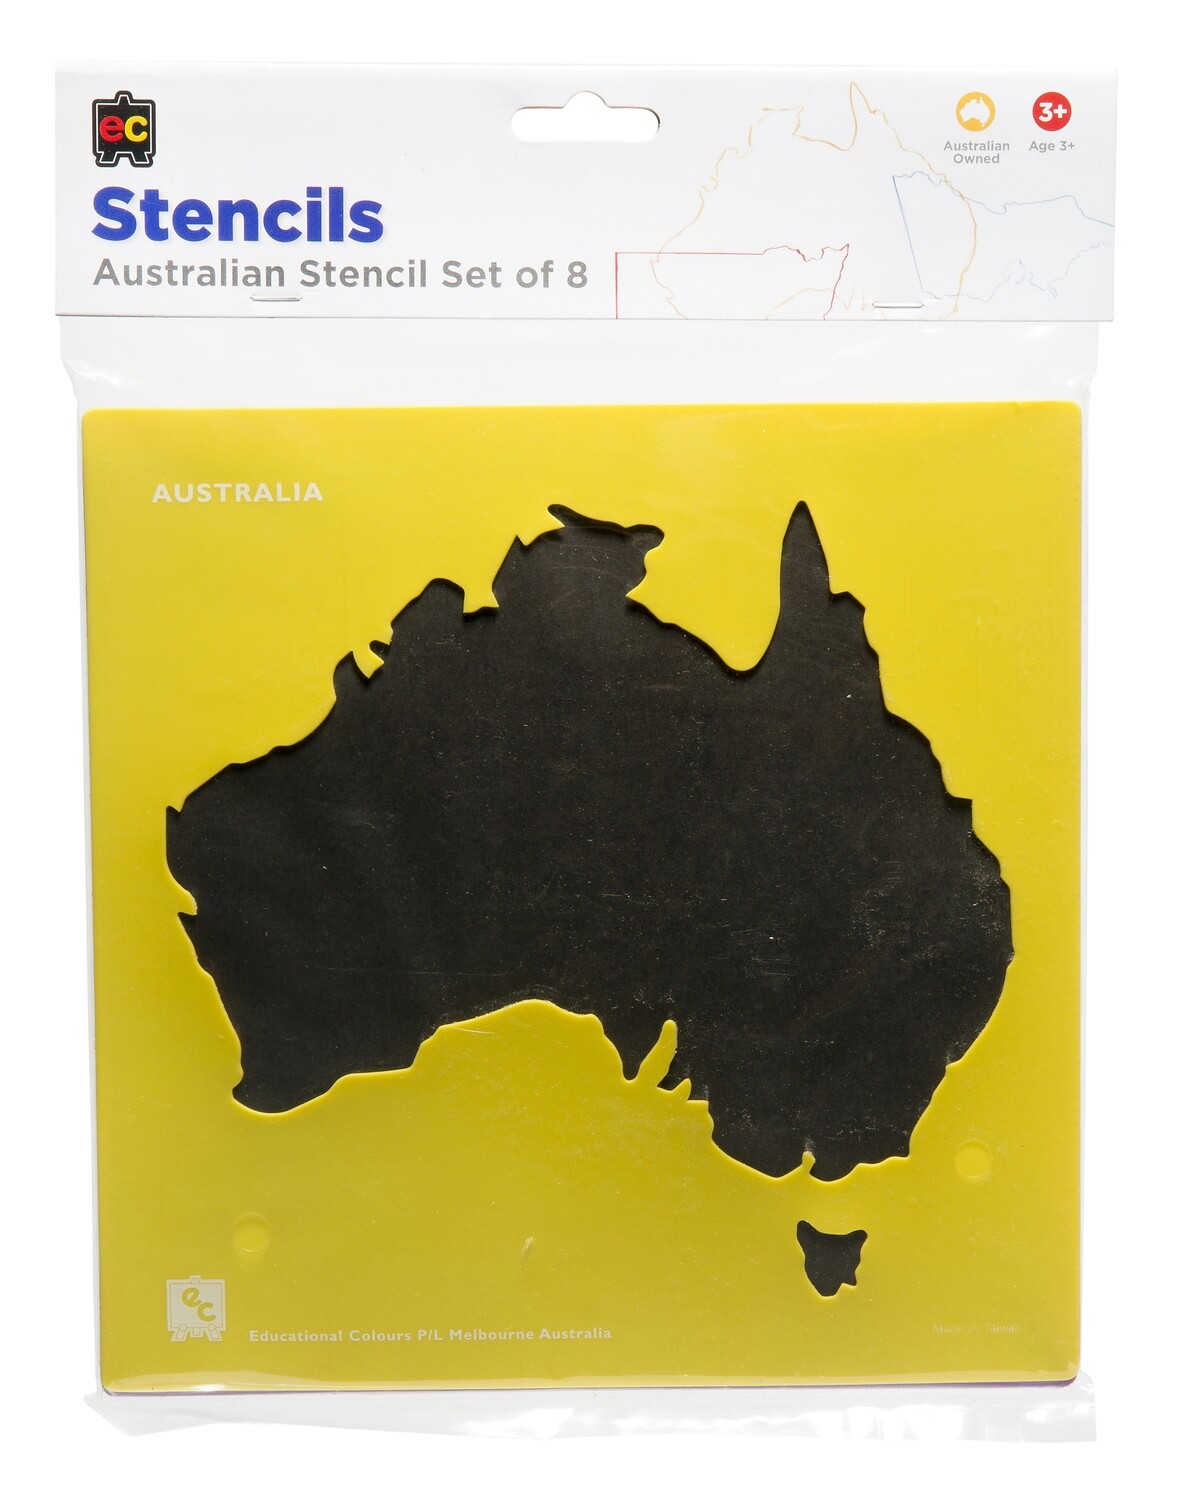 Australia and State Map stencil set of 8